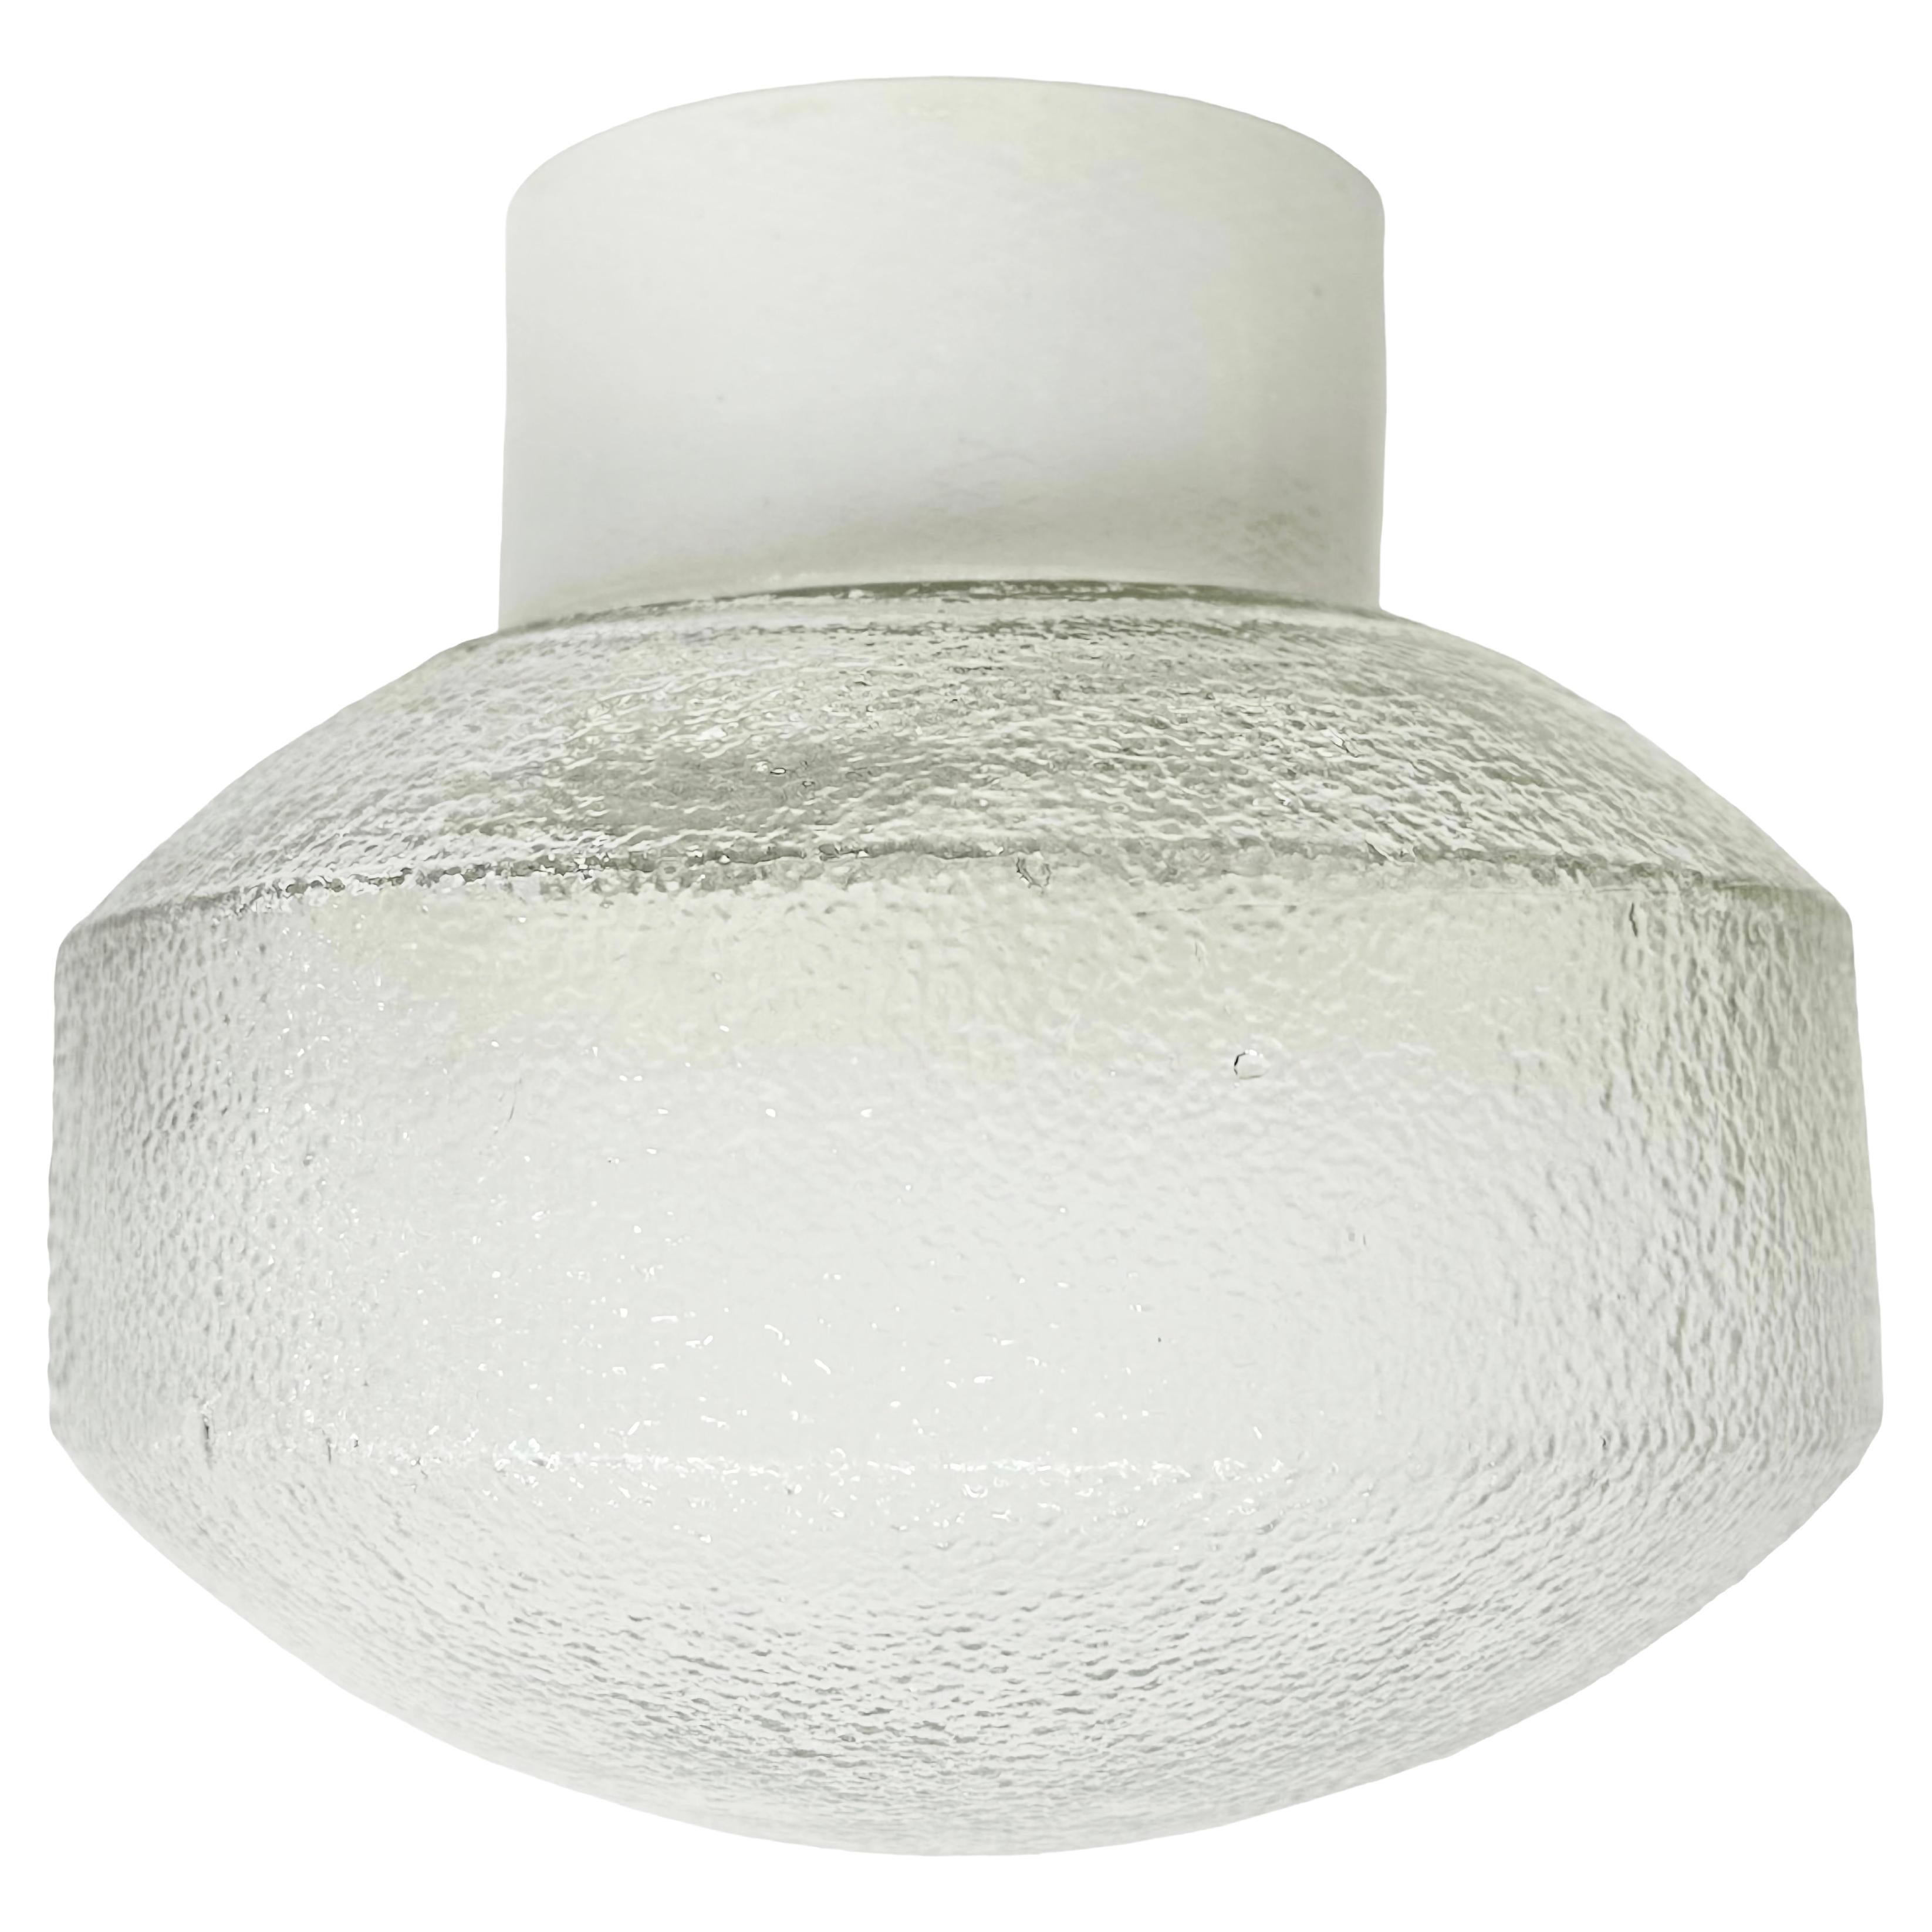 Vintage White Porcelain Ceiling Light with Frosted Glass, 1970s For Sale